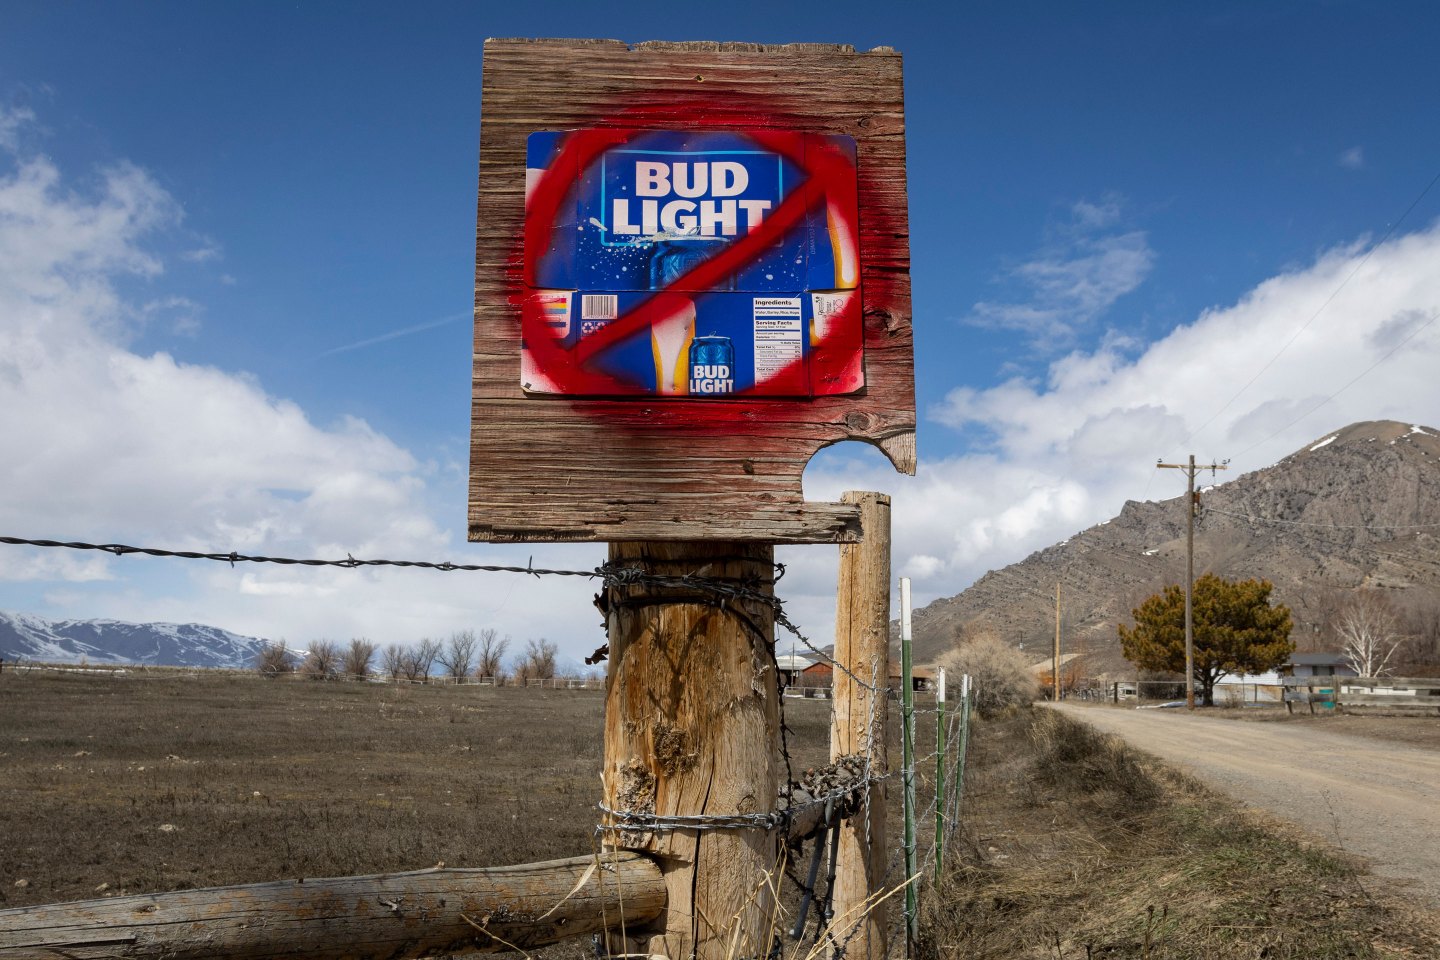 ARCO, ID &#8211; APRIL 21: A sign disparaging Bud Light beer is seen along a country road on April 21, 2023 in Arco, Idaho. Anheuser-Busch, the brewer of Bud Light has faced backlash after the company sponsored two Instagram posts from a transgender woman.(Photo by Natalie Behring/Getty Images)